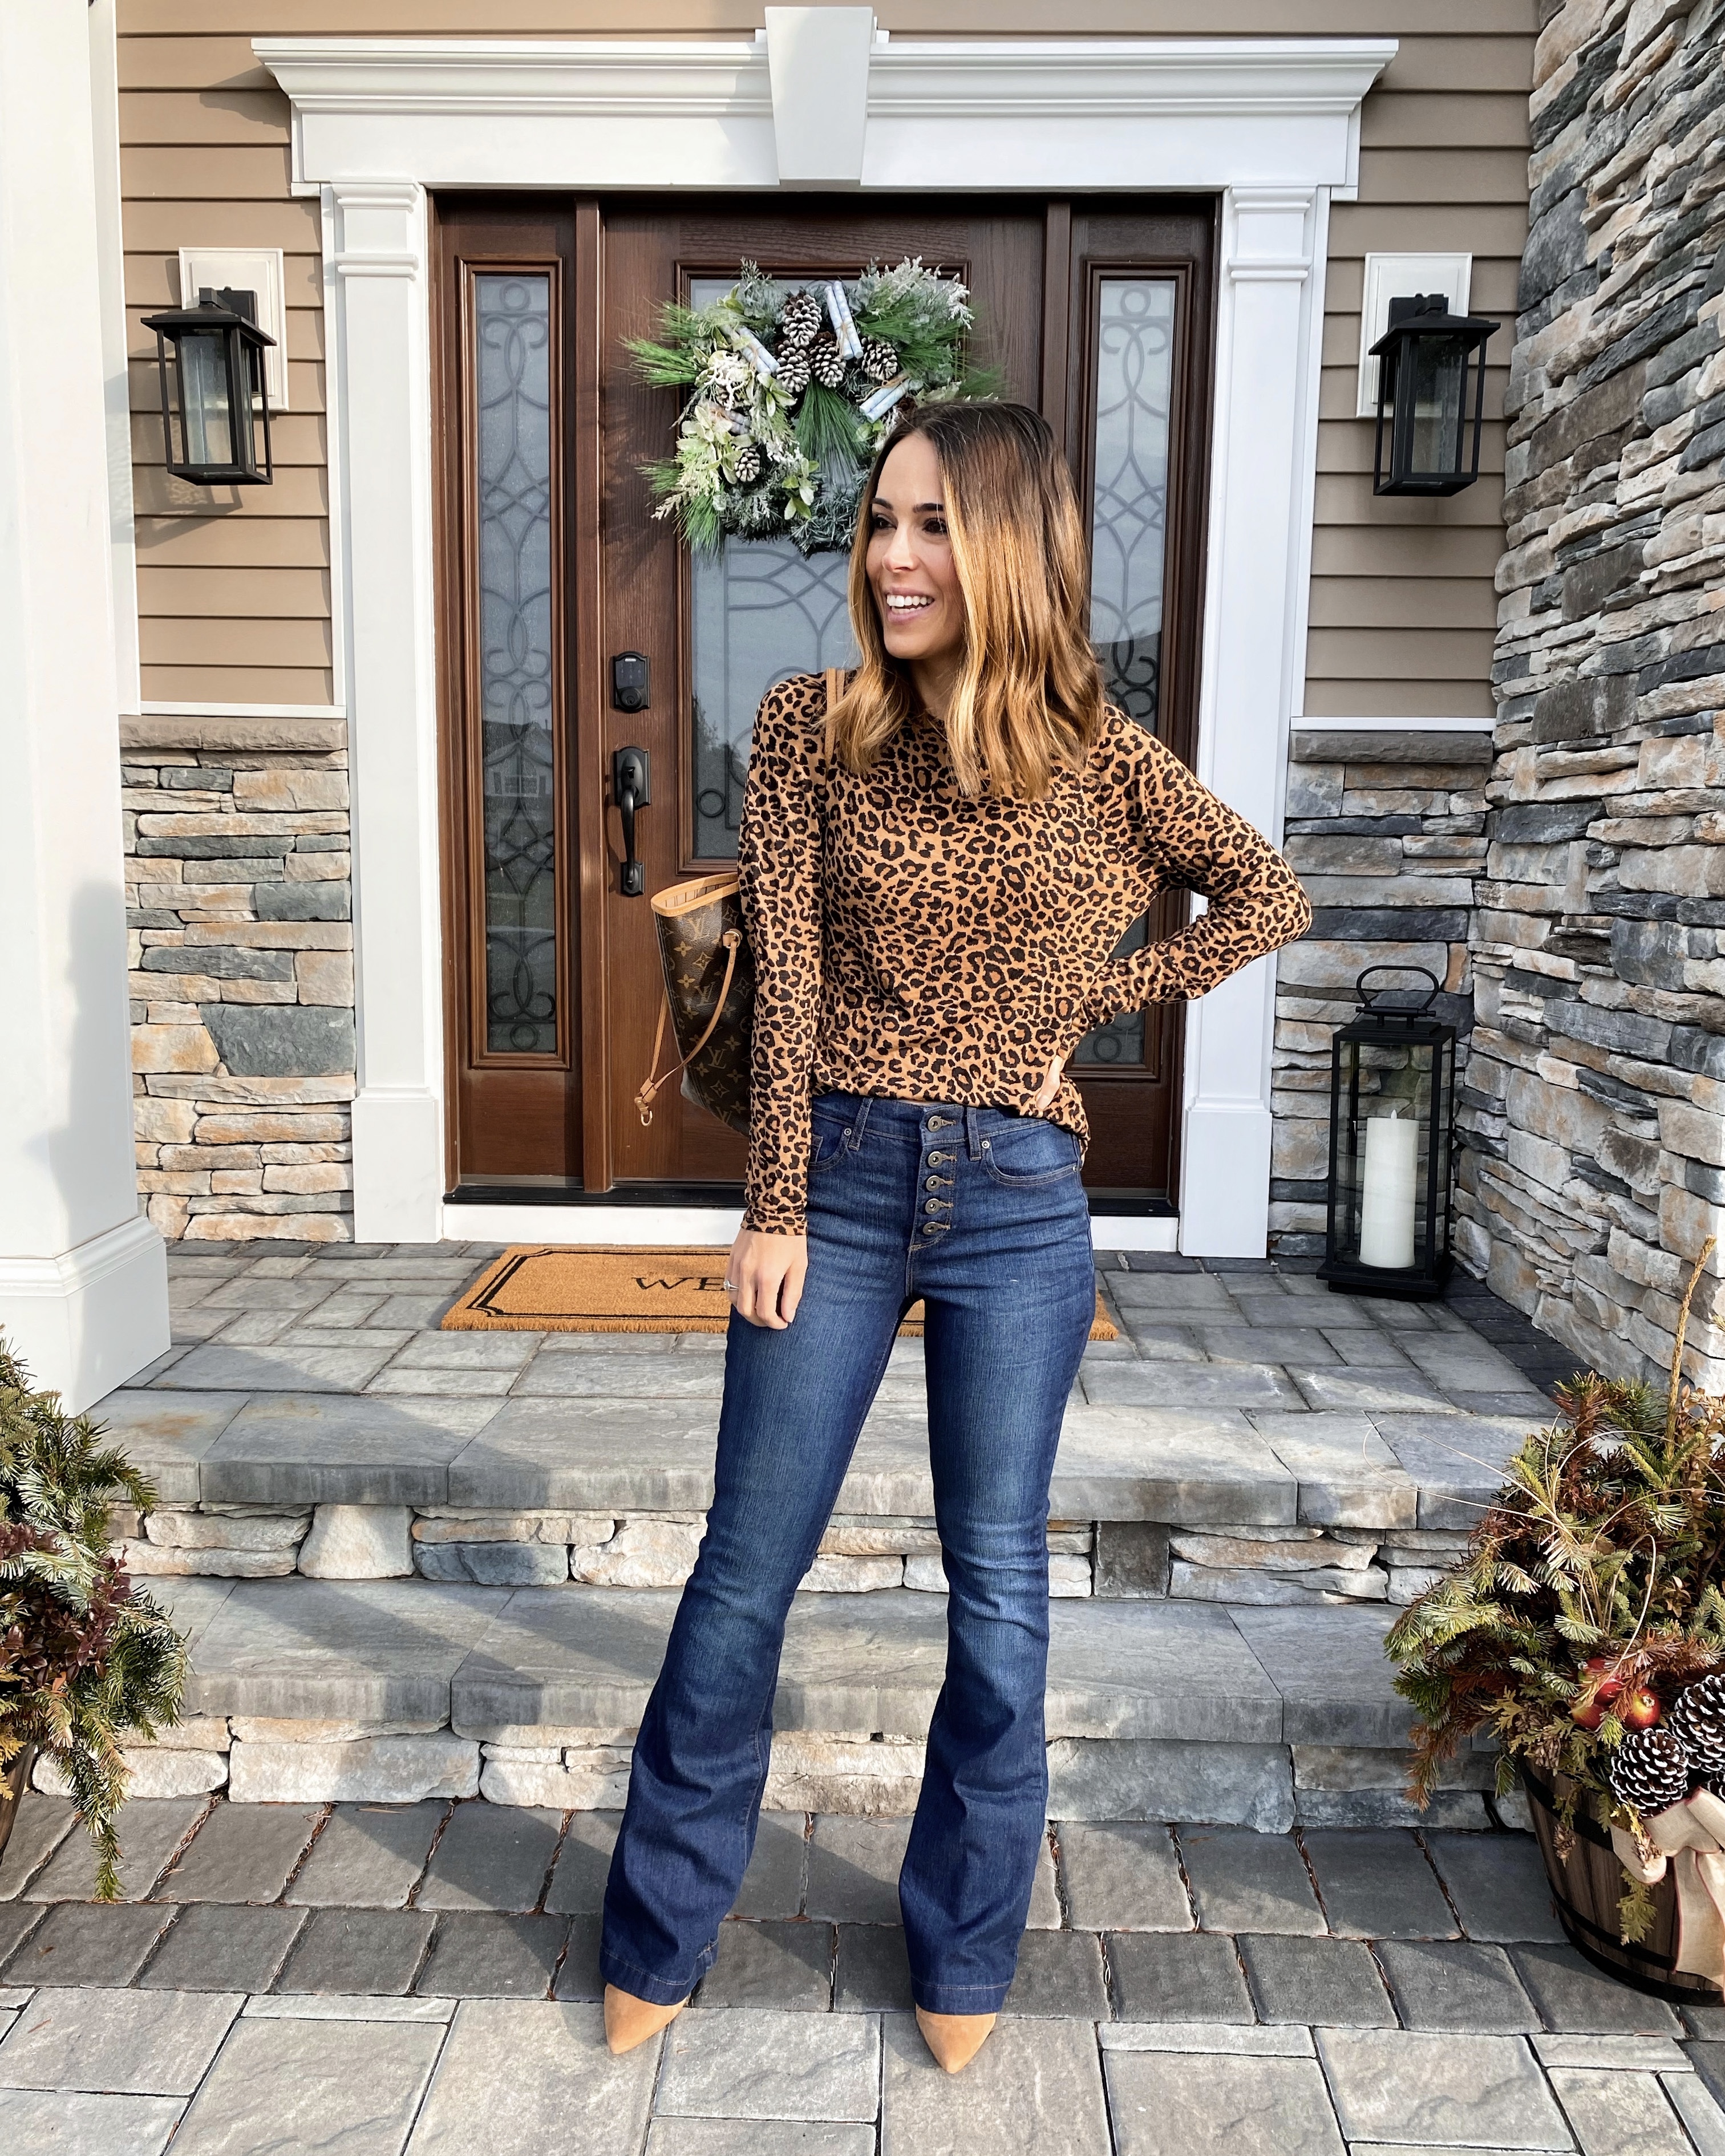 Sofia Vergara and I Agree: This Is the Coolest Way to Wear Your Jeans